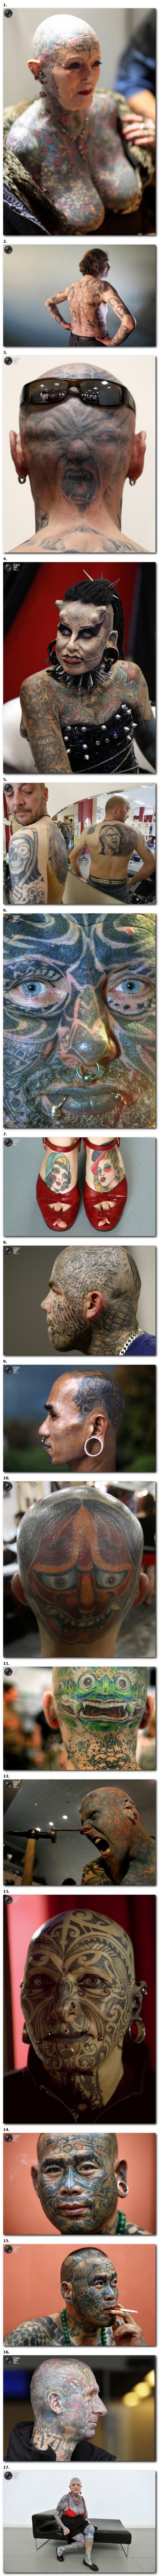 Tattooing has been practiced for centuries in many cultures spread throughout the world.Indeed, the island of Great Britain takes its name from tattooing, with Britons translating as 'people of the designs' and the Picts, who originally inhabited the northern part of Britain, literally meaning 'the painted people'.1 British people remain the most t